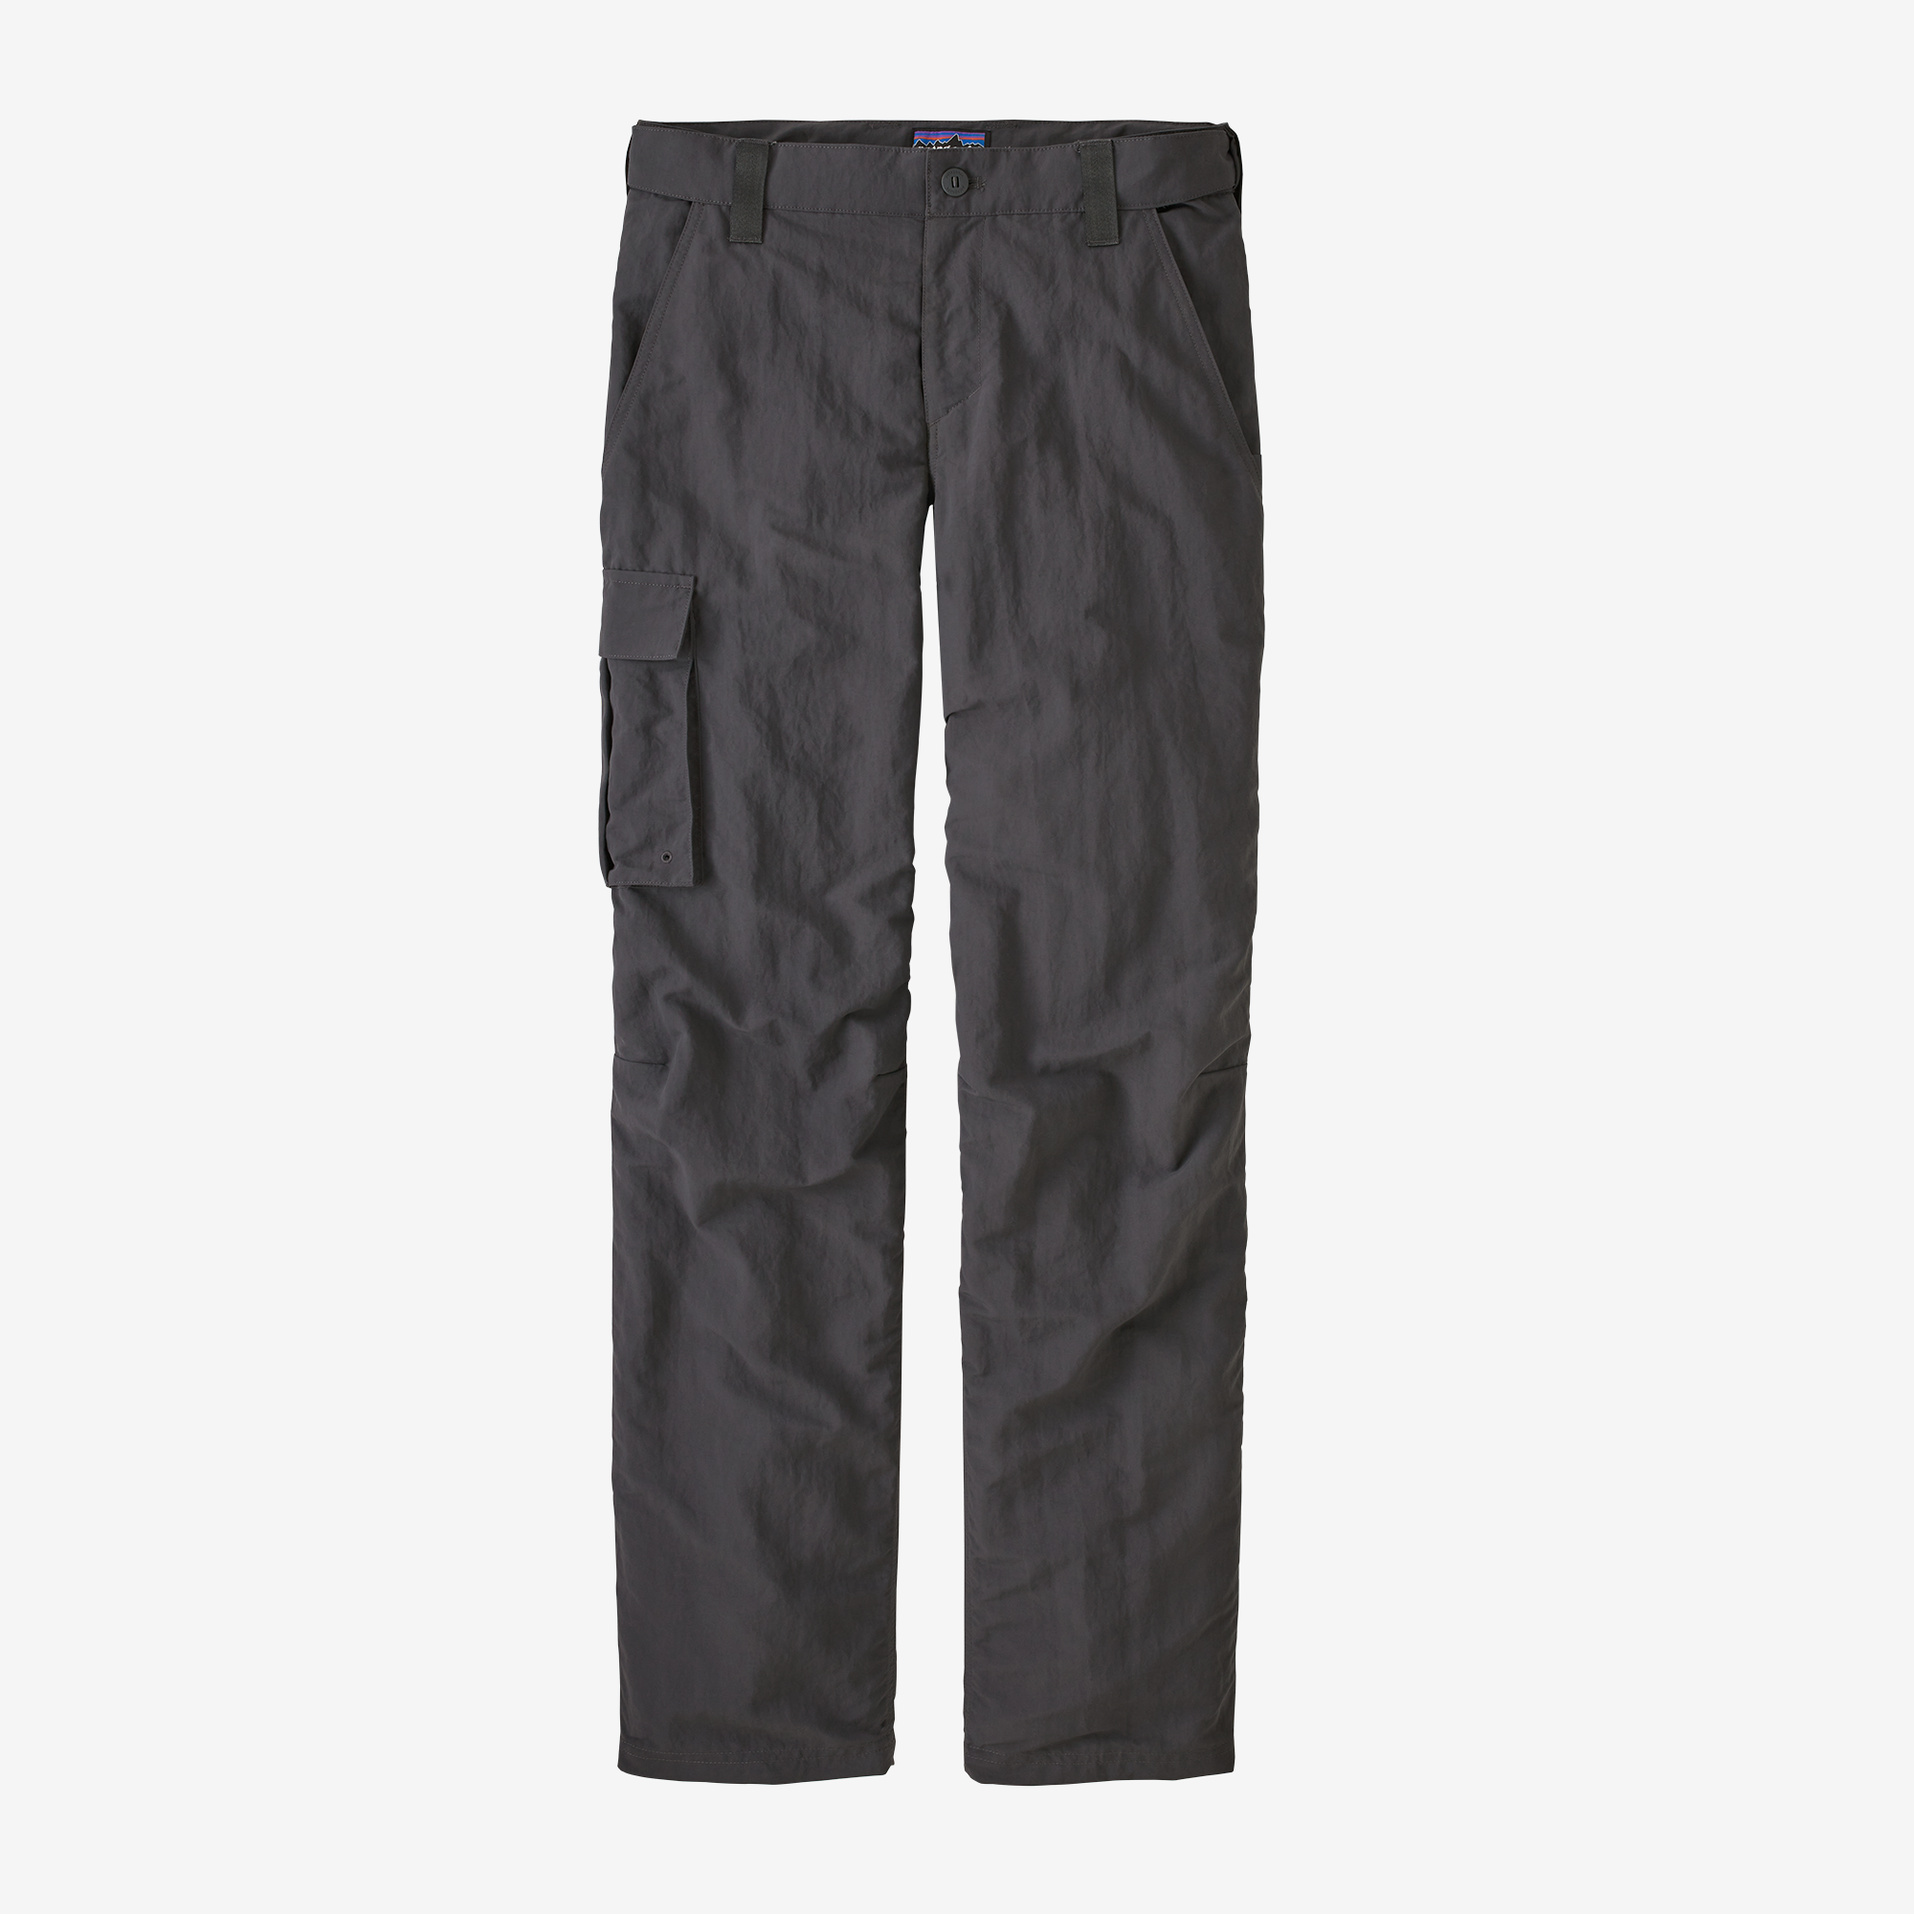 Patagonia M's Swiftcurrent Wet Wade Pants - Short - Forge Grey - XL